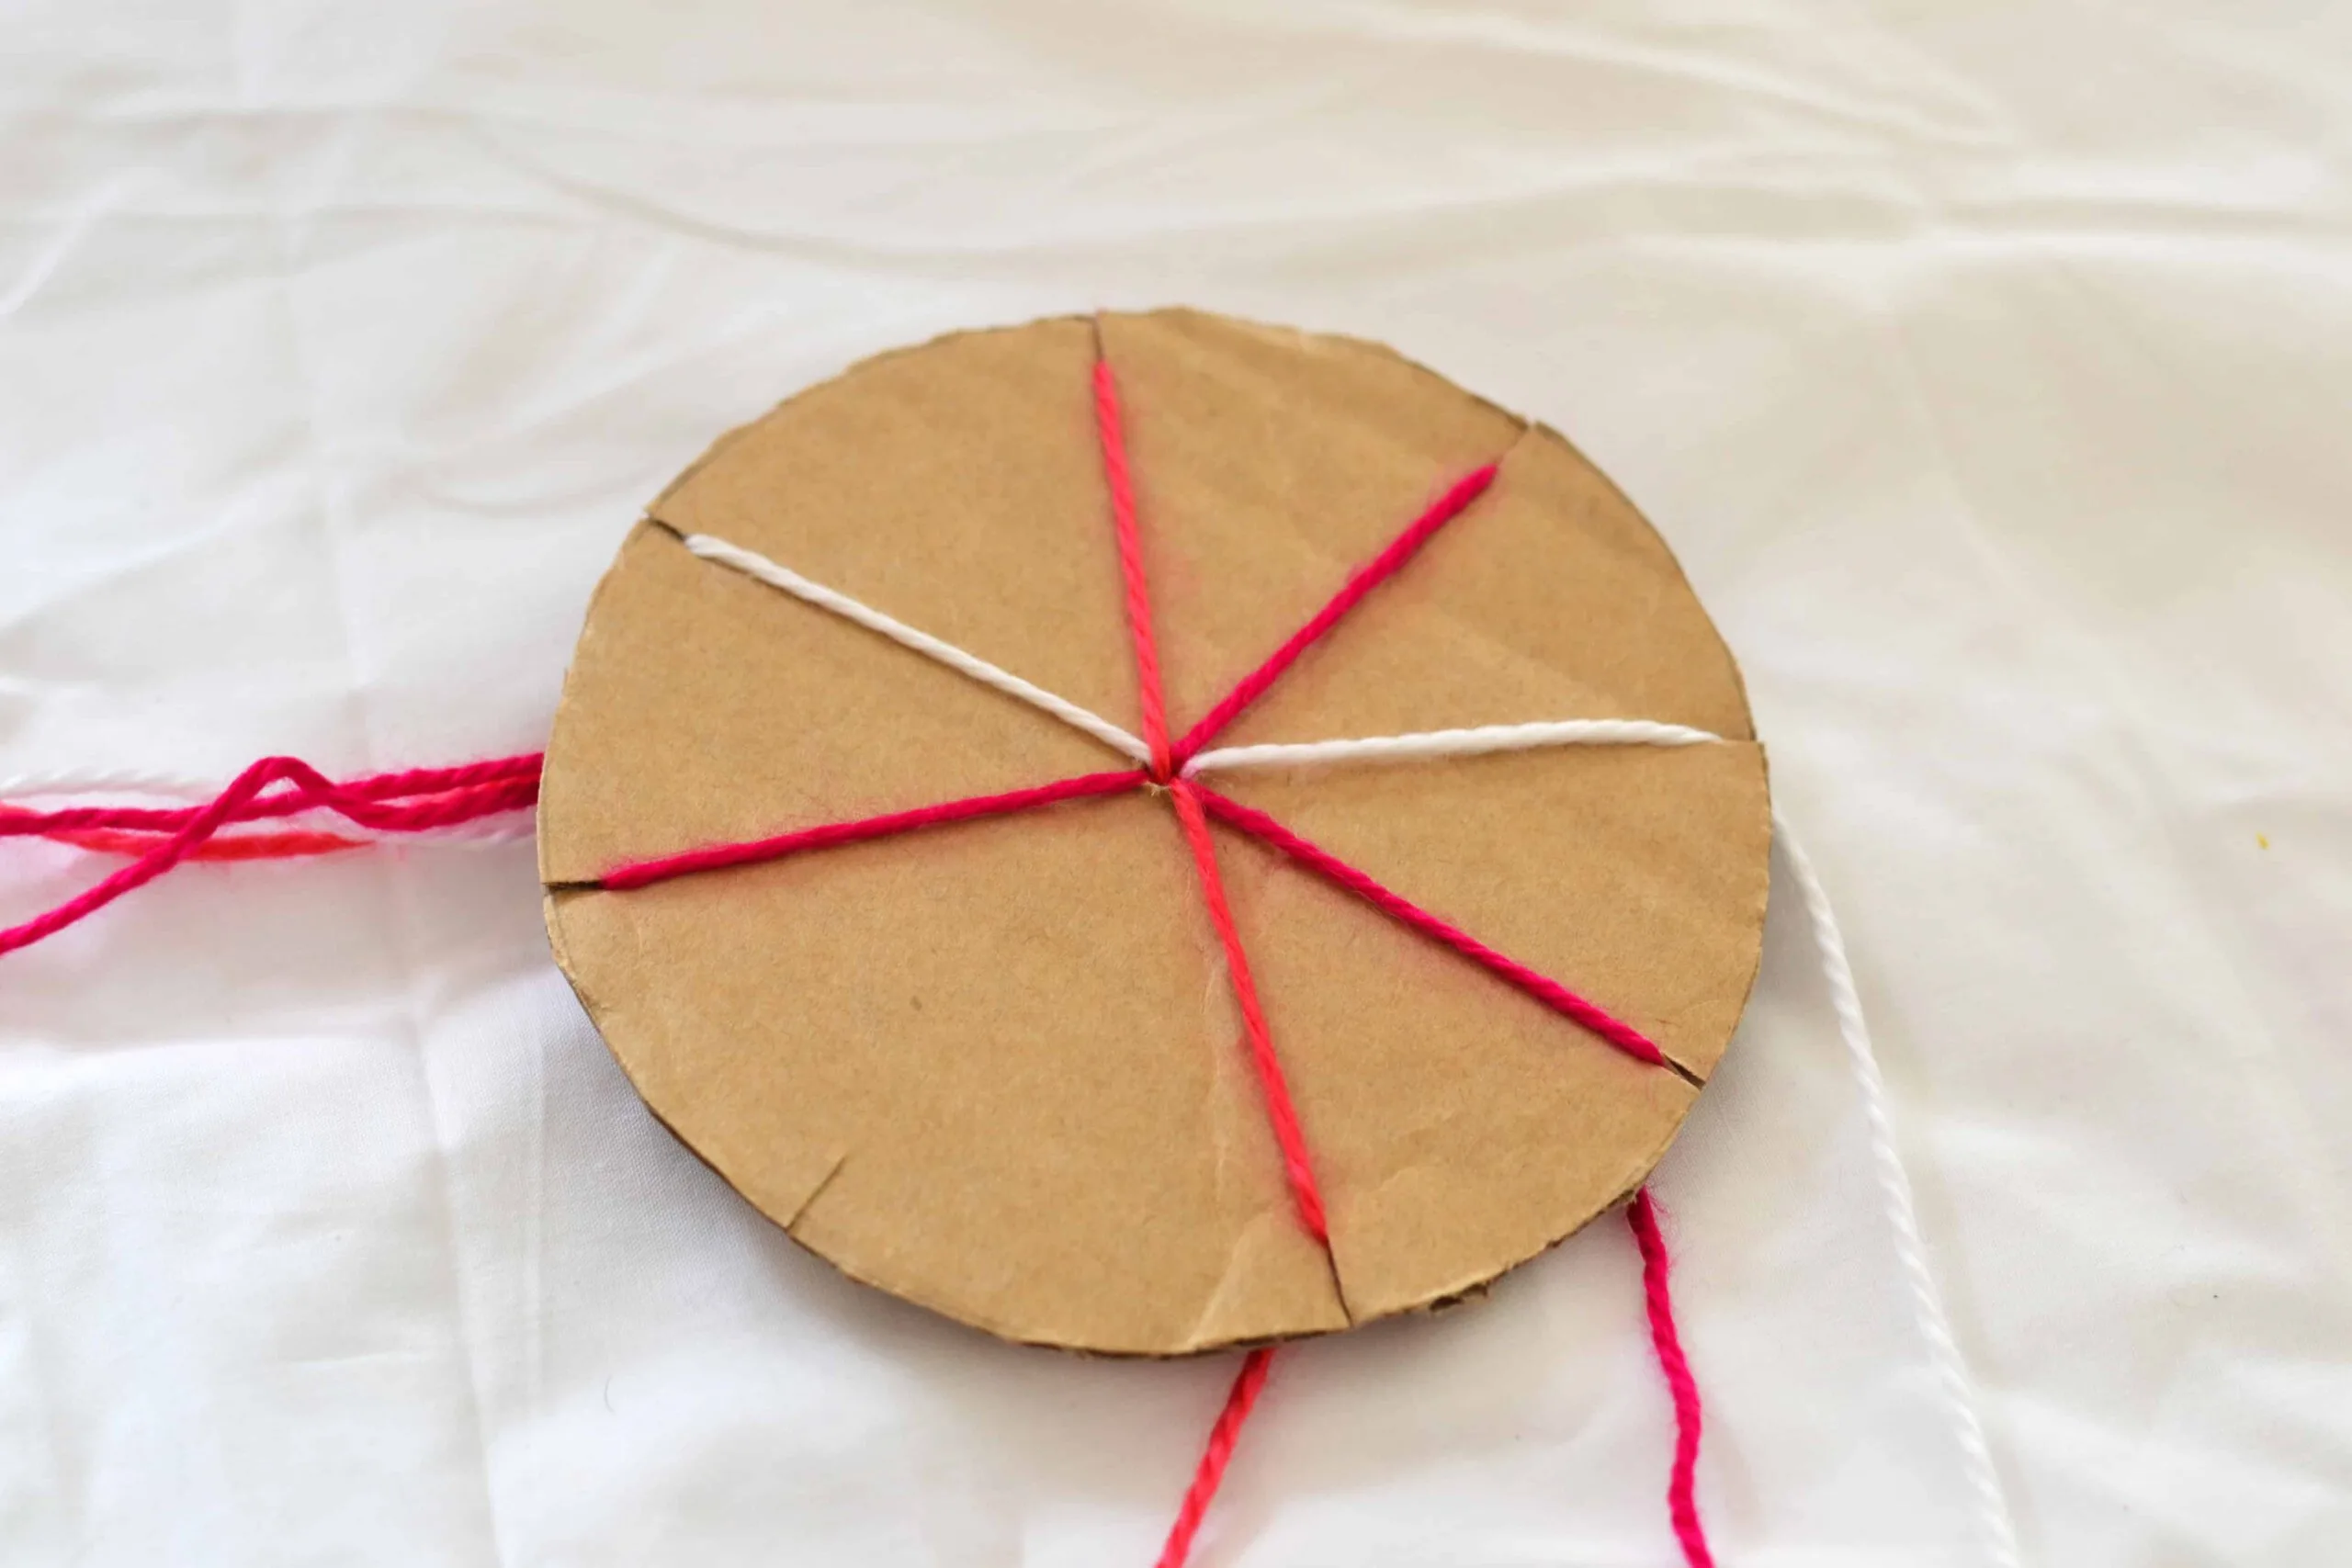 Cardboard wheel with different coloured wool to start making a friendship bracelet